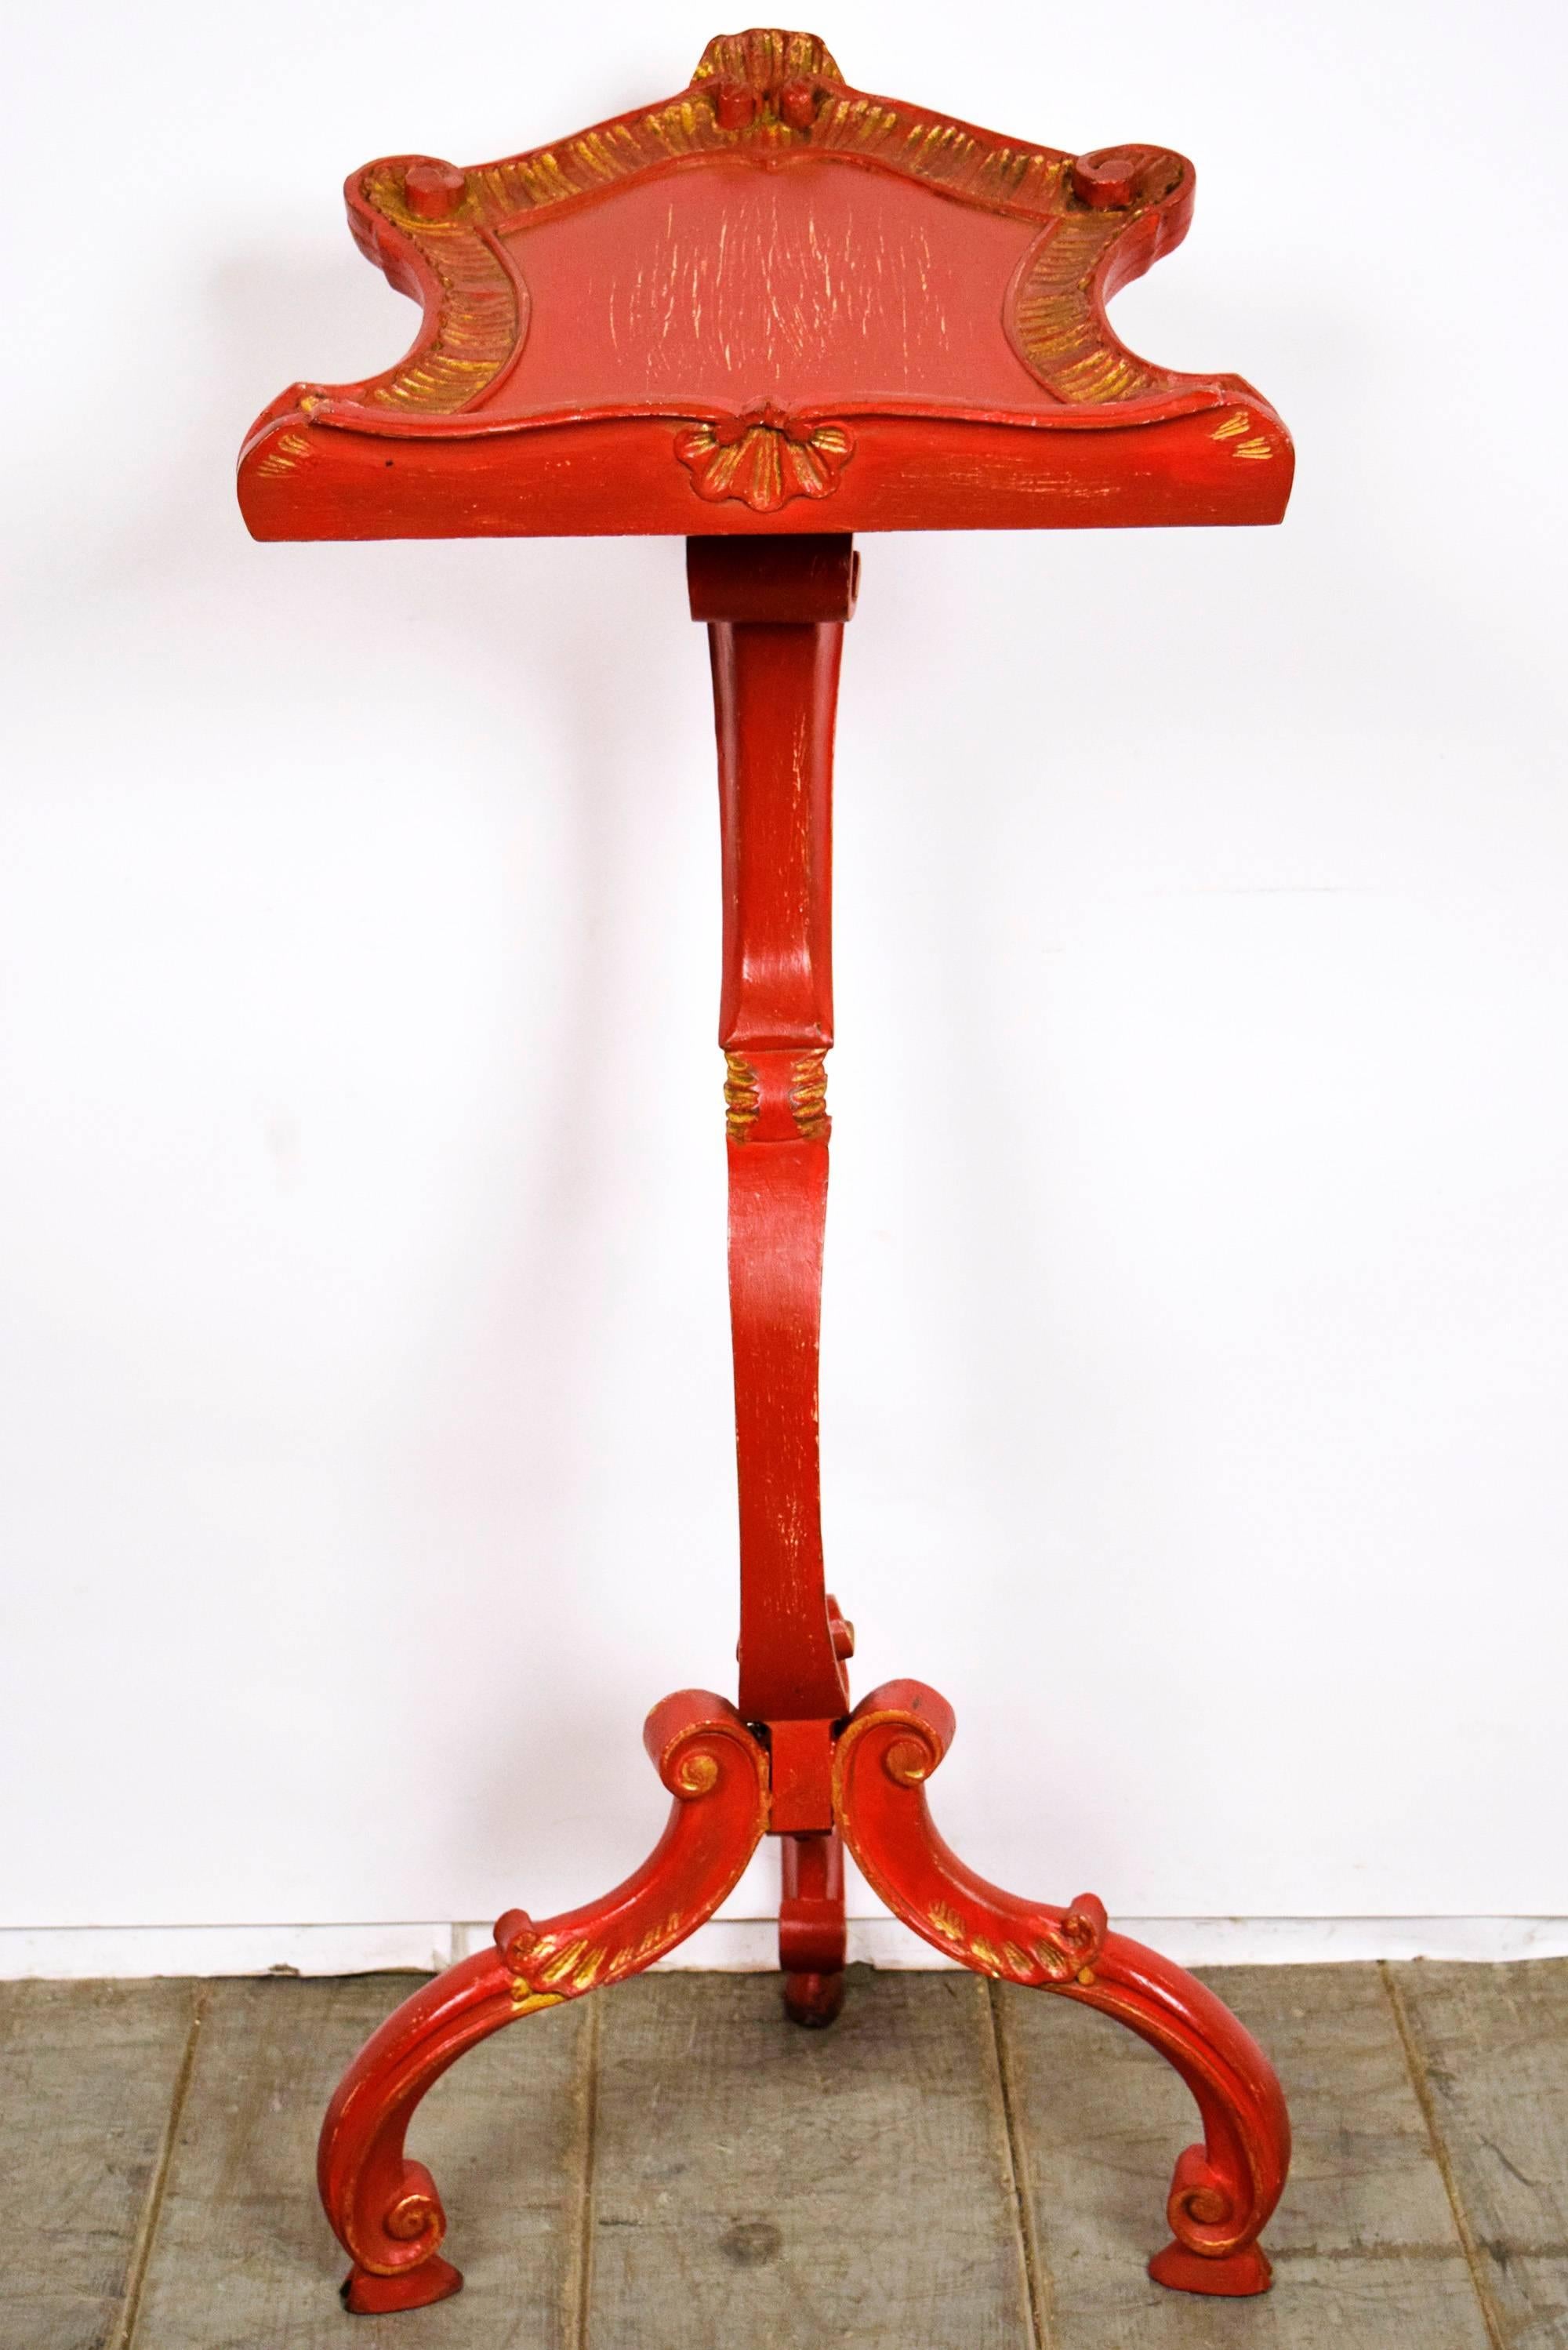 This is a mesmerizing Antique Venetian Polychromed and Gilt wood music stand. It has intricately carved curved legs in the bottom with gilt accents. It has a heavy duty sculpted wood post which is both elegantly decorative and strongly supportive.